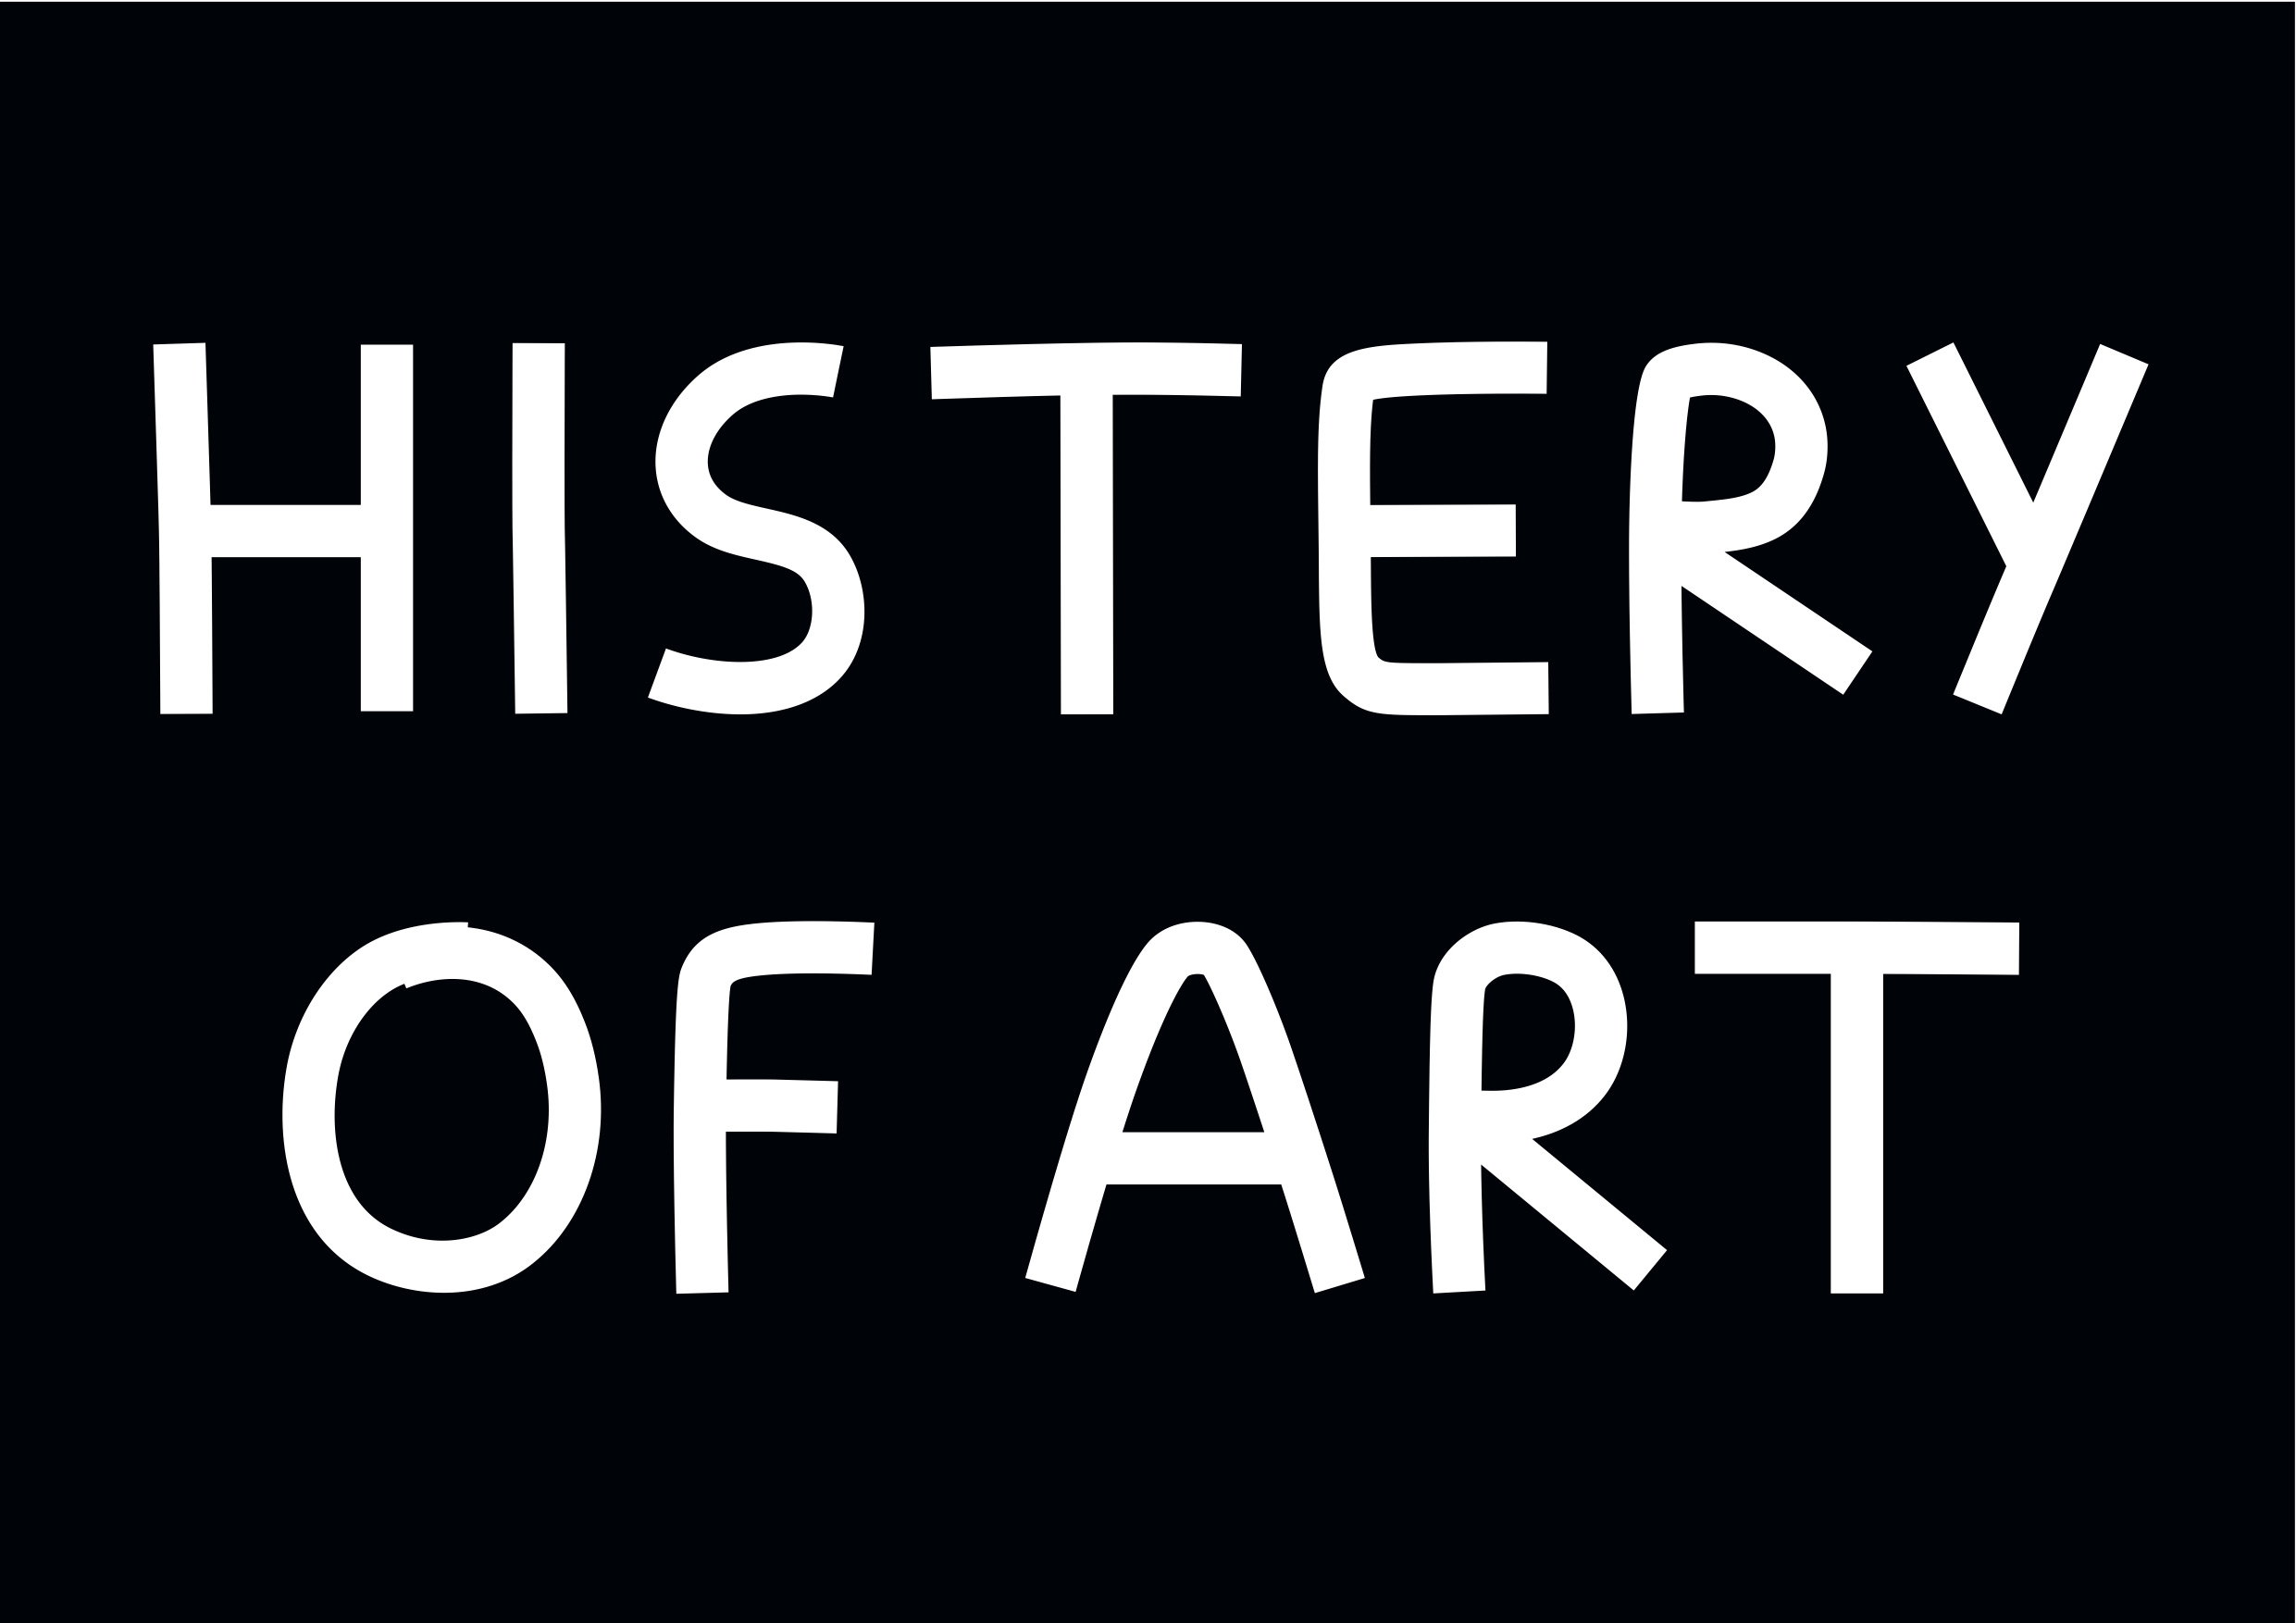 Histery of Art